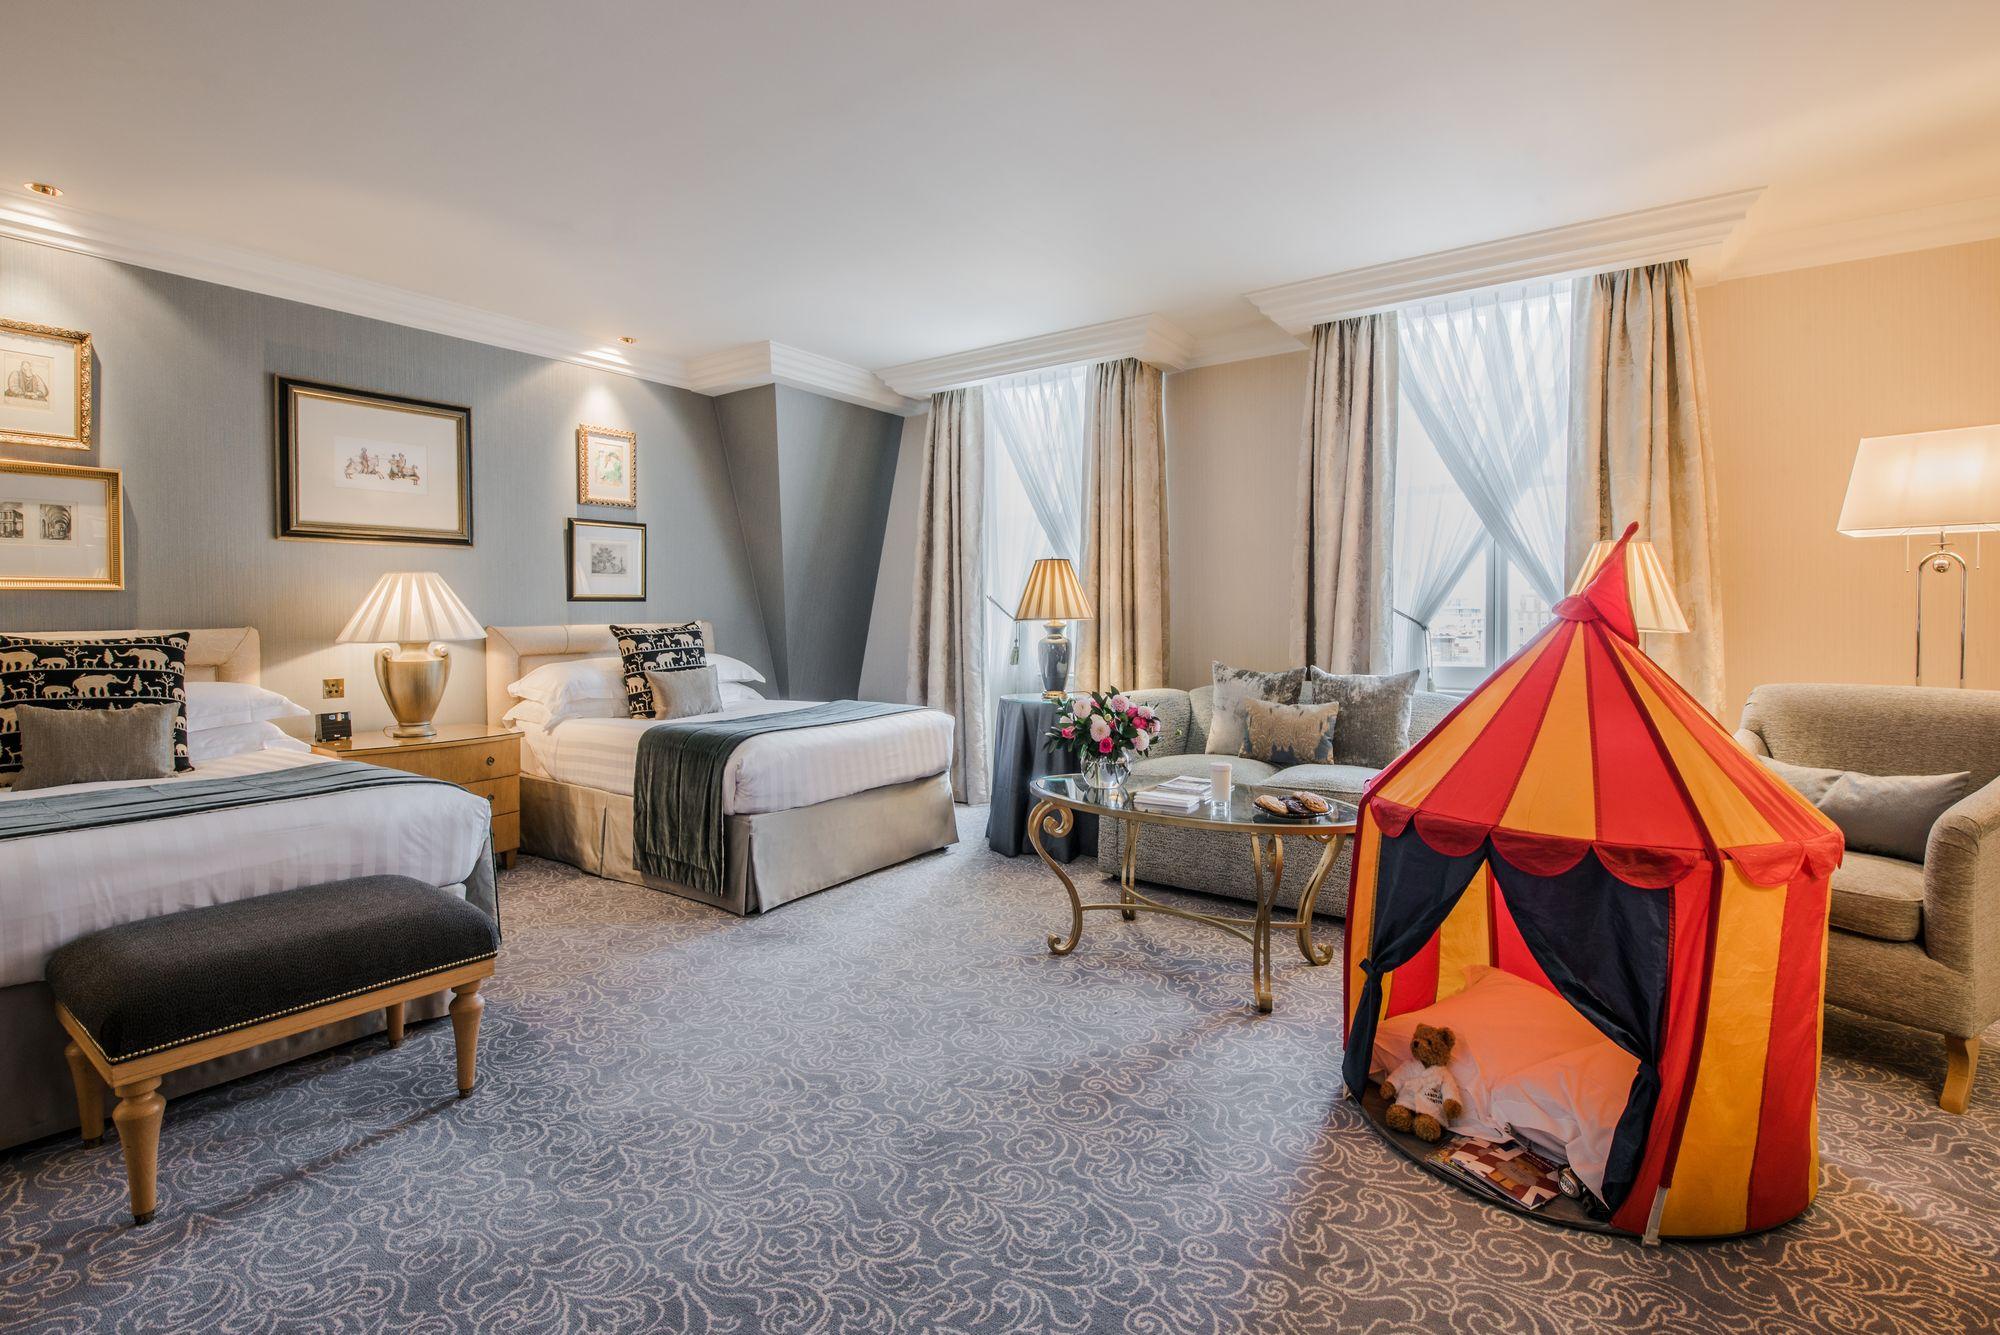 Child-friendly rooms at The Landmark